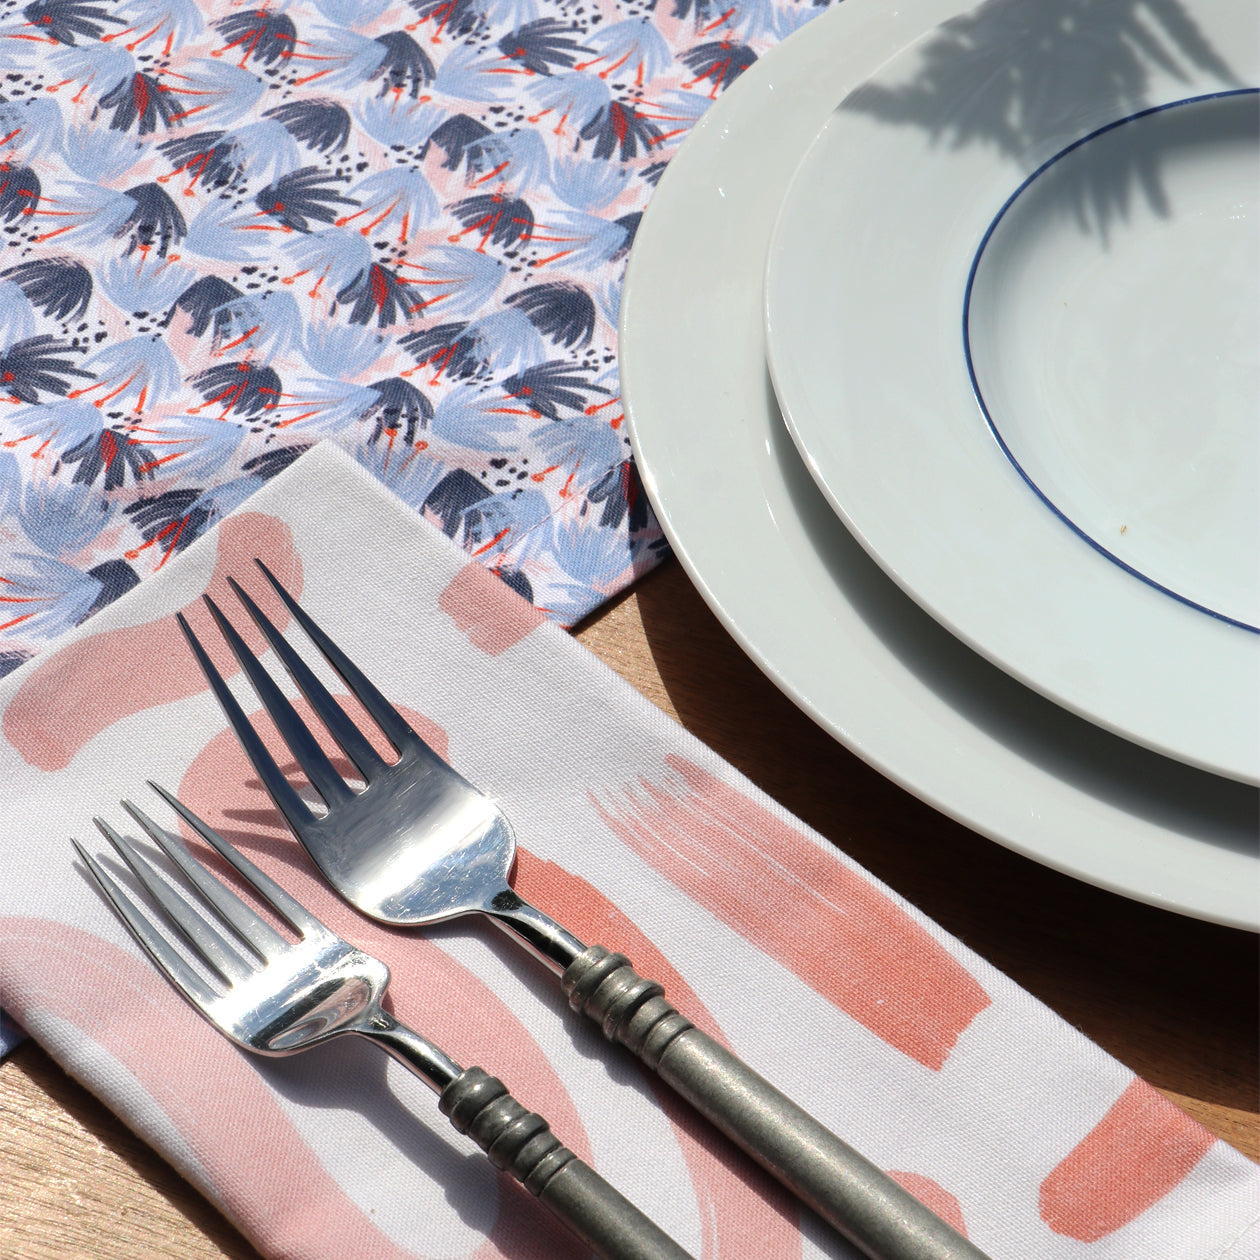 Pink Graphic Printed Napkin Close-up under silverware next to two white plates and Red and Blue Printed Runner